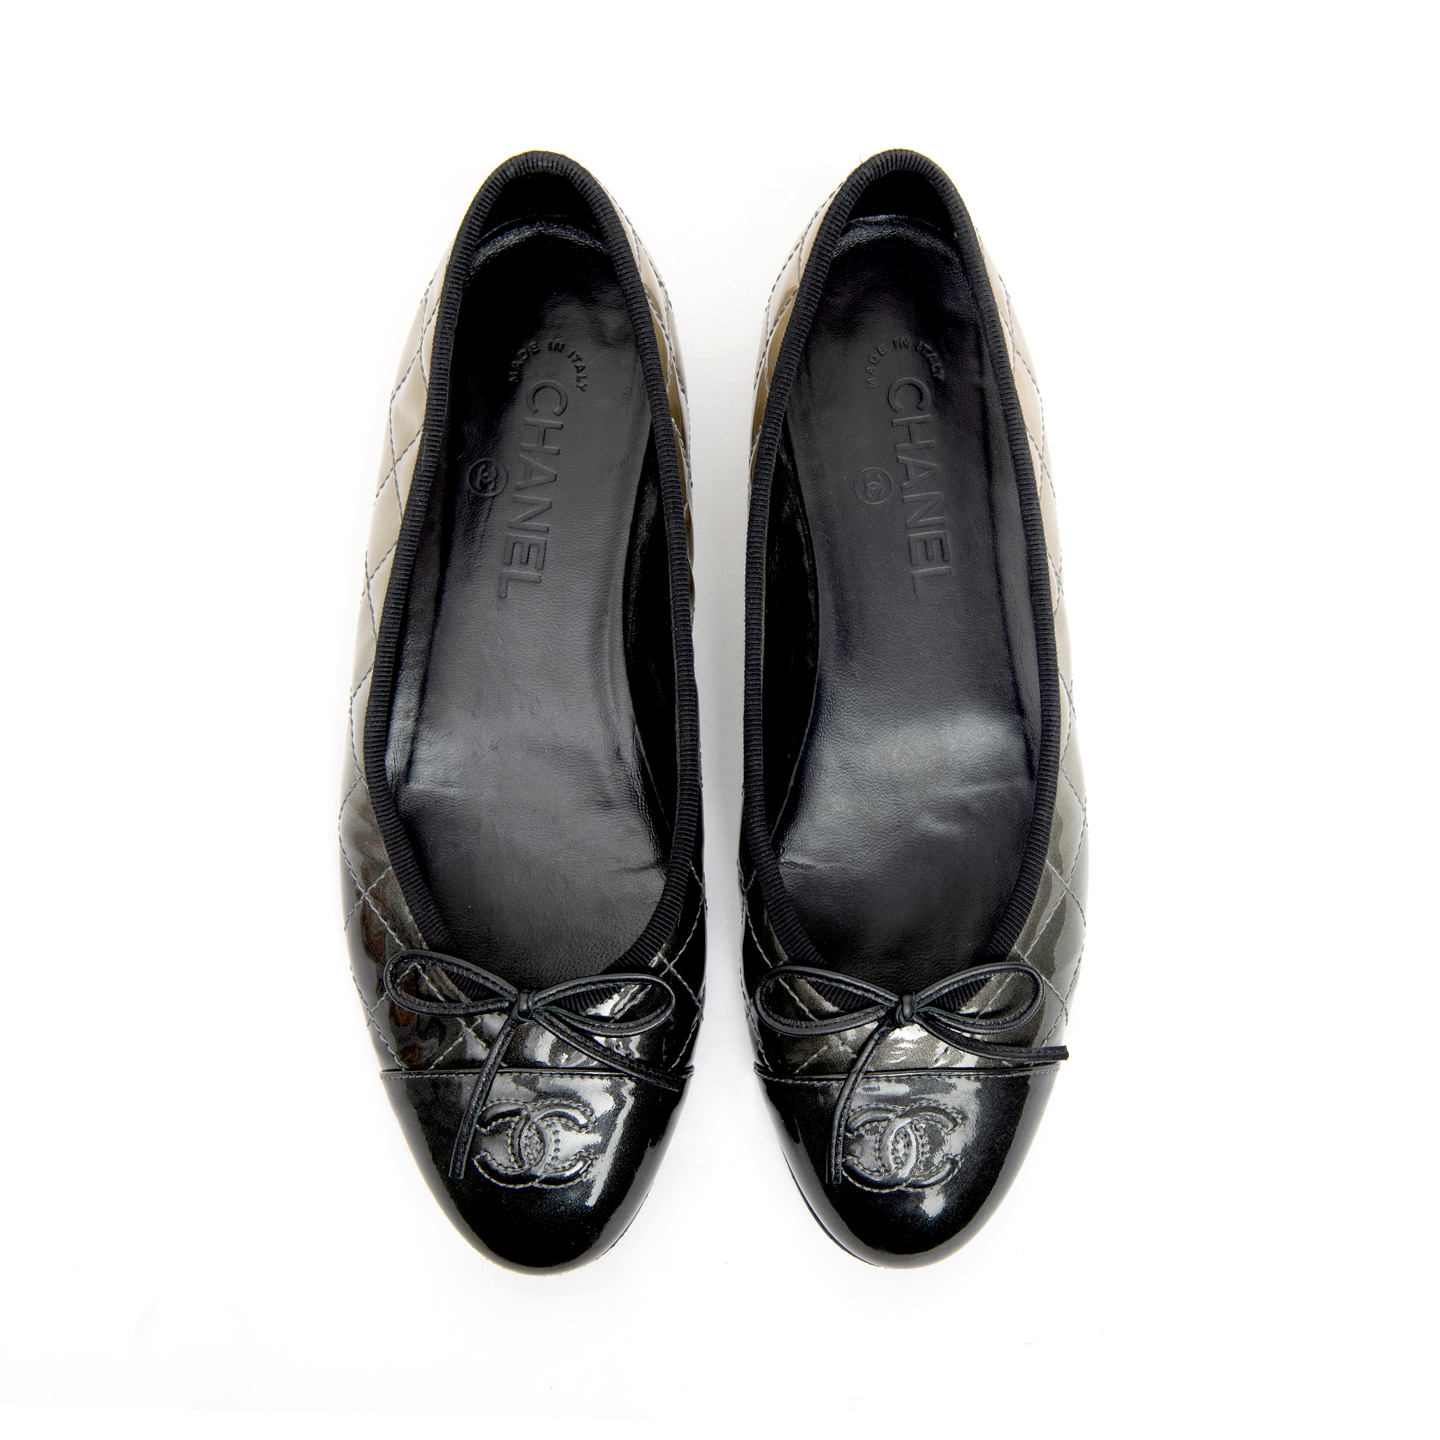 Chanel Black and Grey Ombre Cap-Toe Ballet Flats, Size 38.5 - LabelCentric